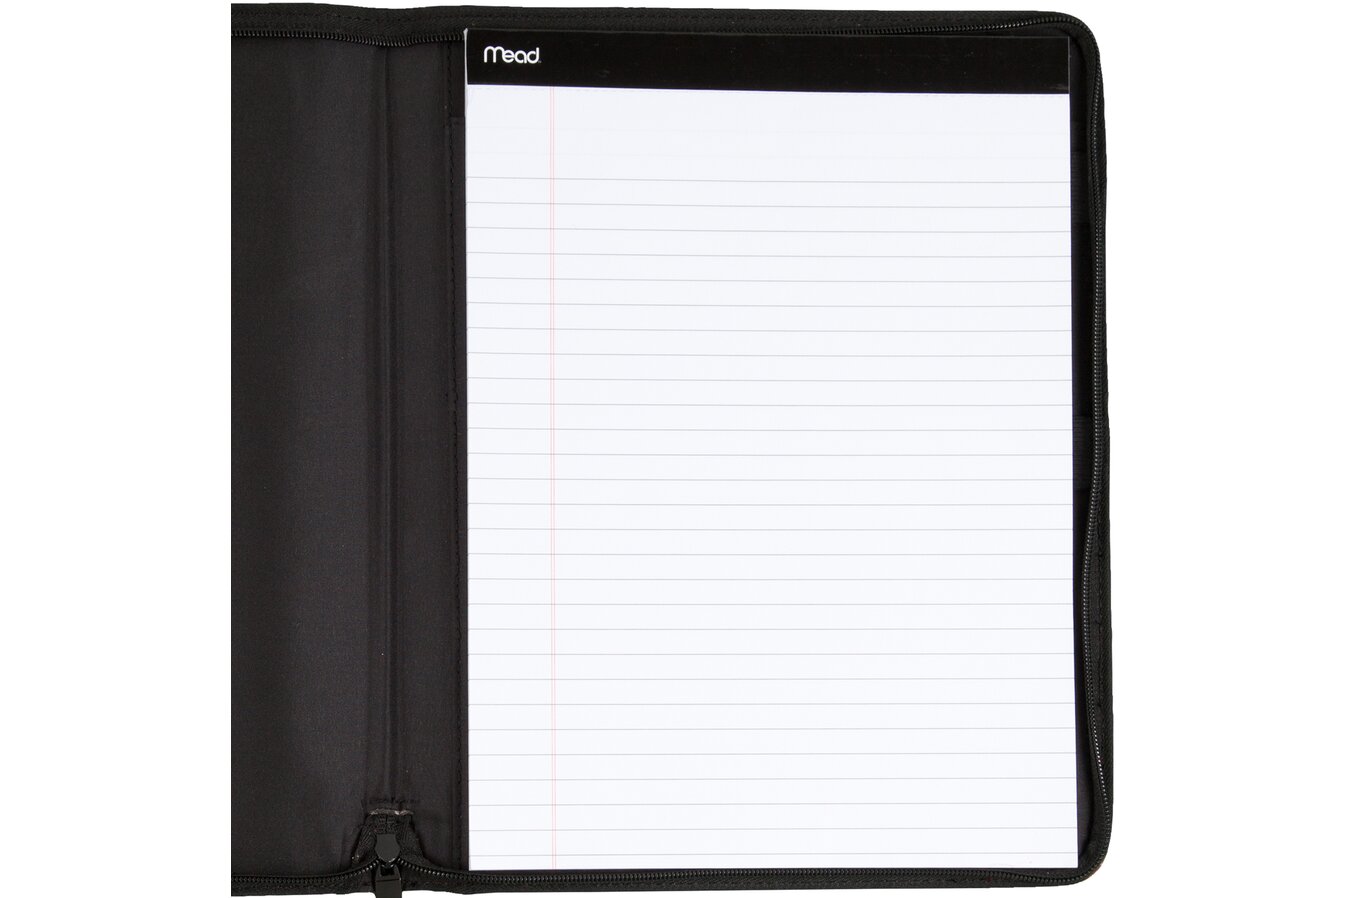 AT-A-Glance Business Jacket Desk Planner Cover BLACK 8 Inch Book Organizer  Note Pad Holder Zip Closure 